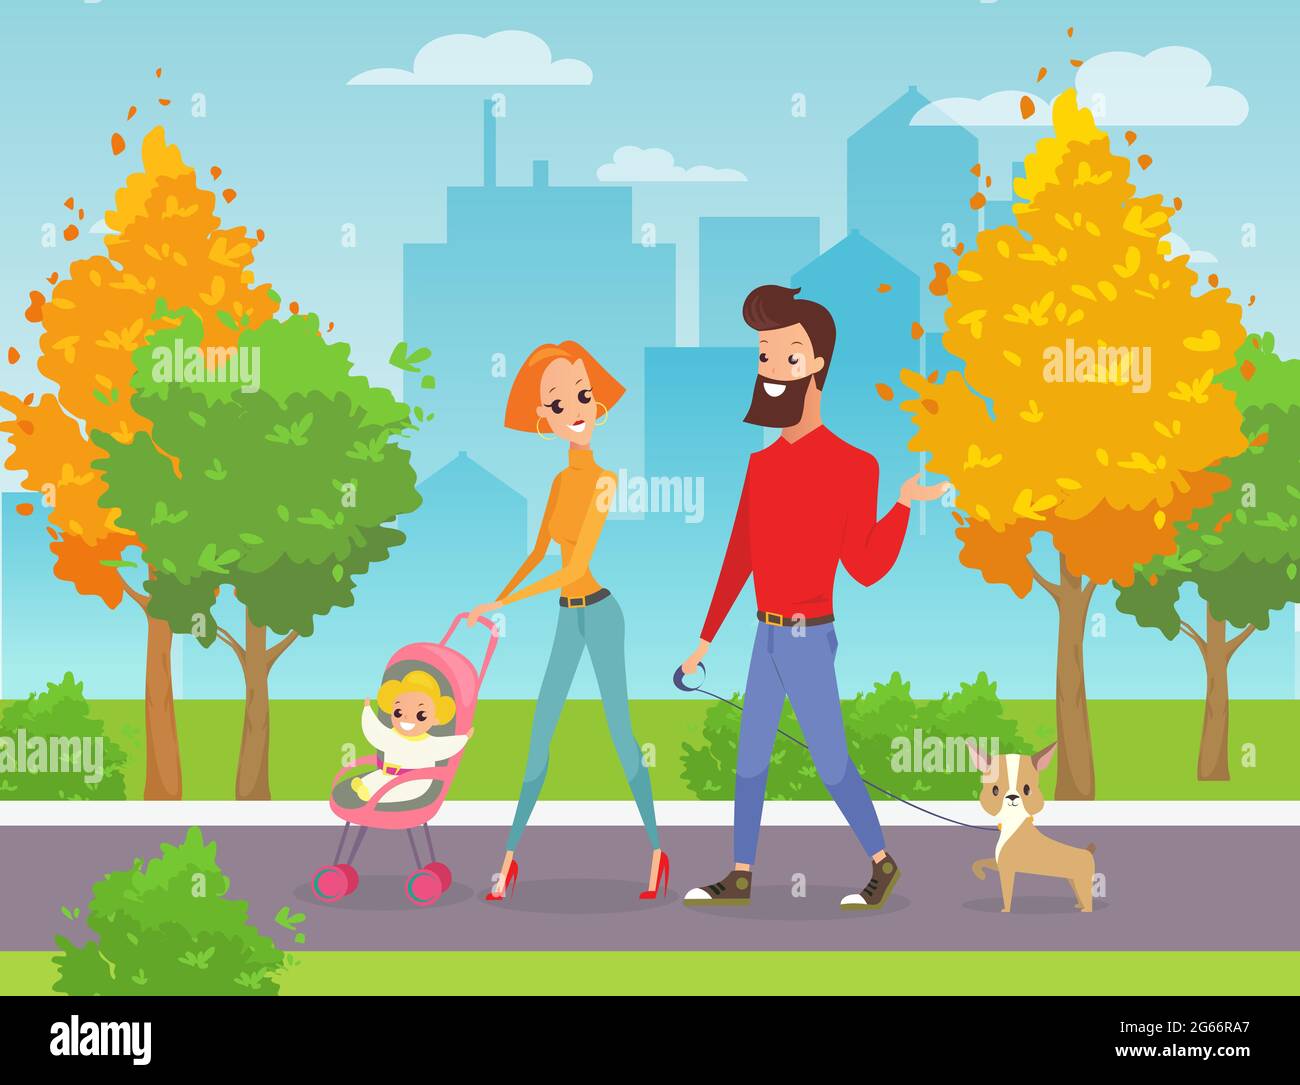 Vector illustration of happy family walks in the city park. Father, mother, baby and dog together outdoors. Husband, wife and kid walking in city park Stock Vector